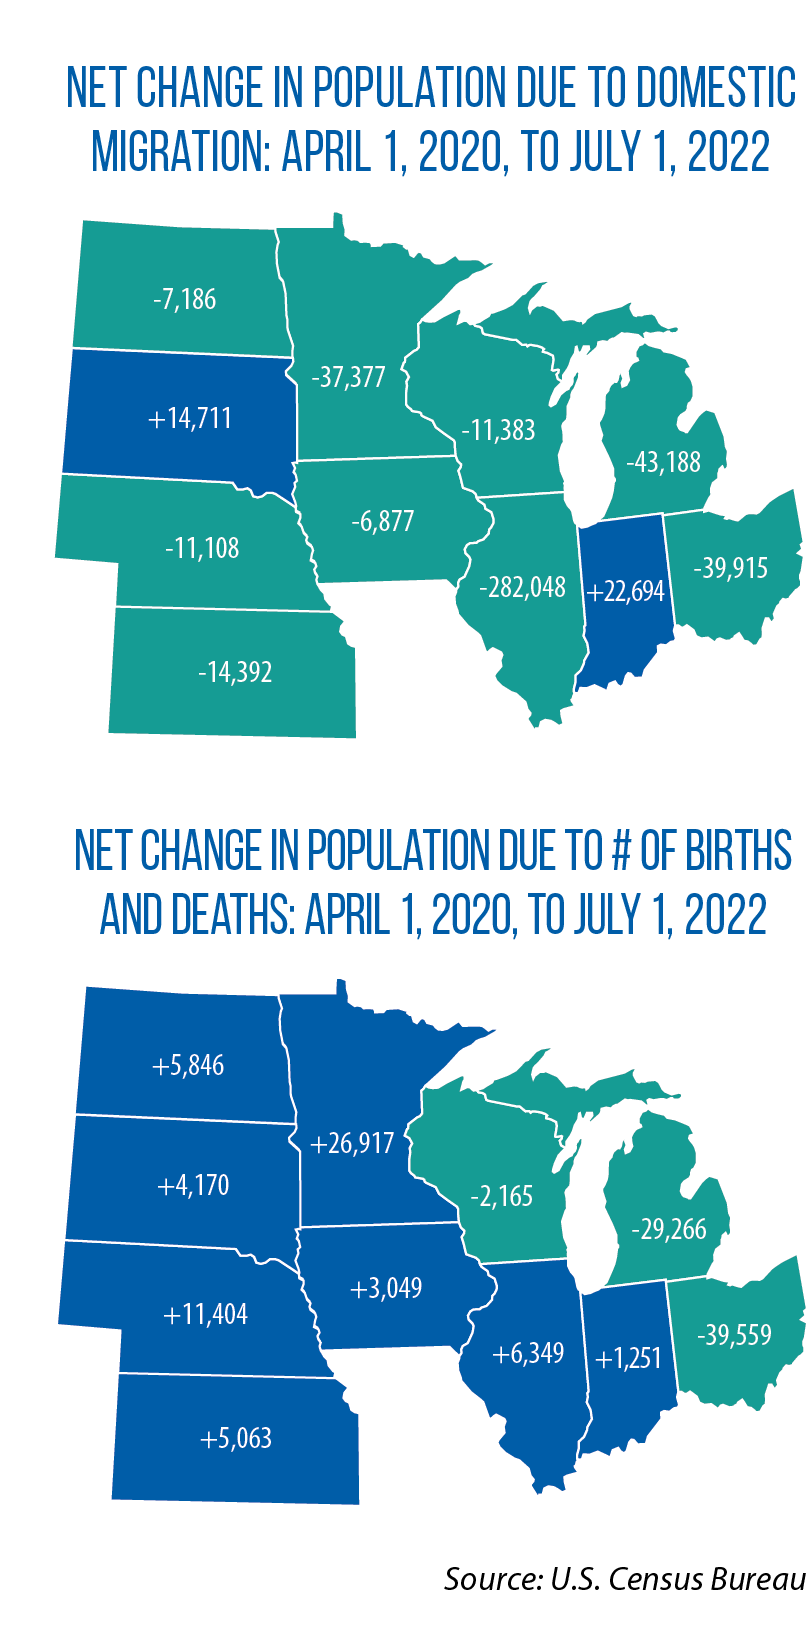 Maps showing net changes in Midwestern state populations from April 2020 to July 2022 due to domestic migration, and number of births/deaths.